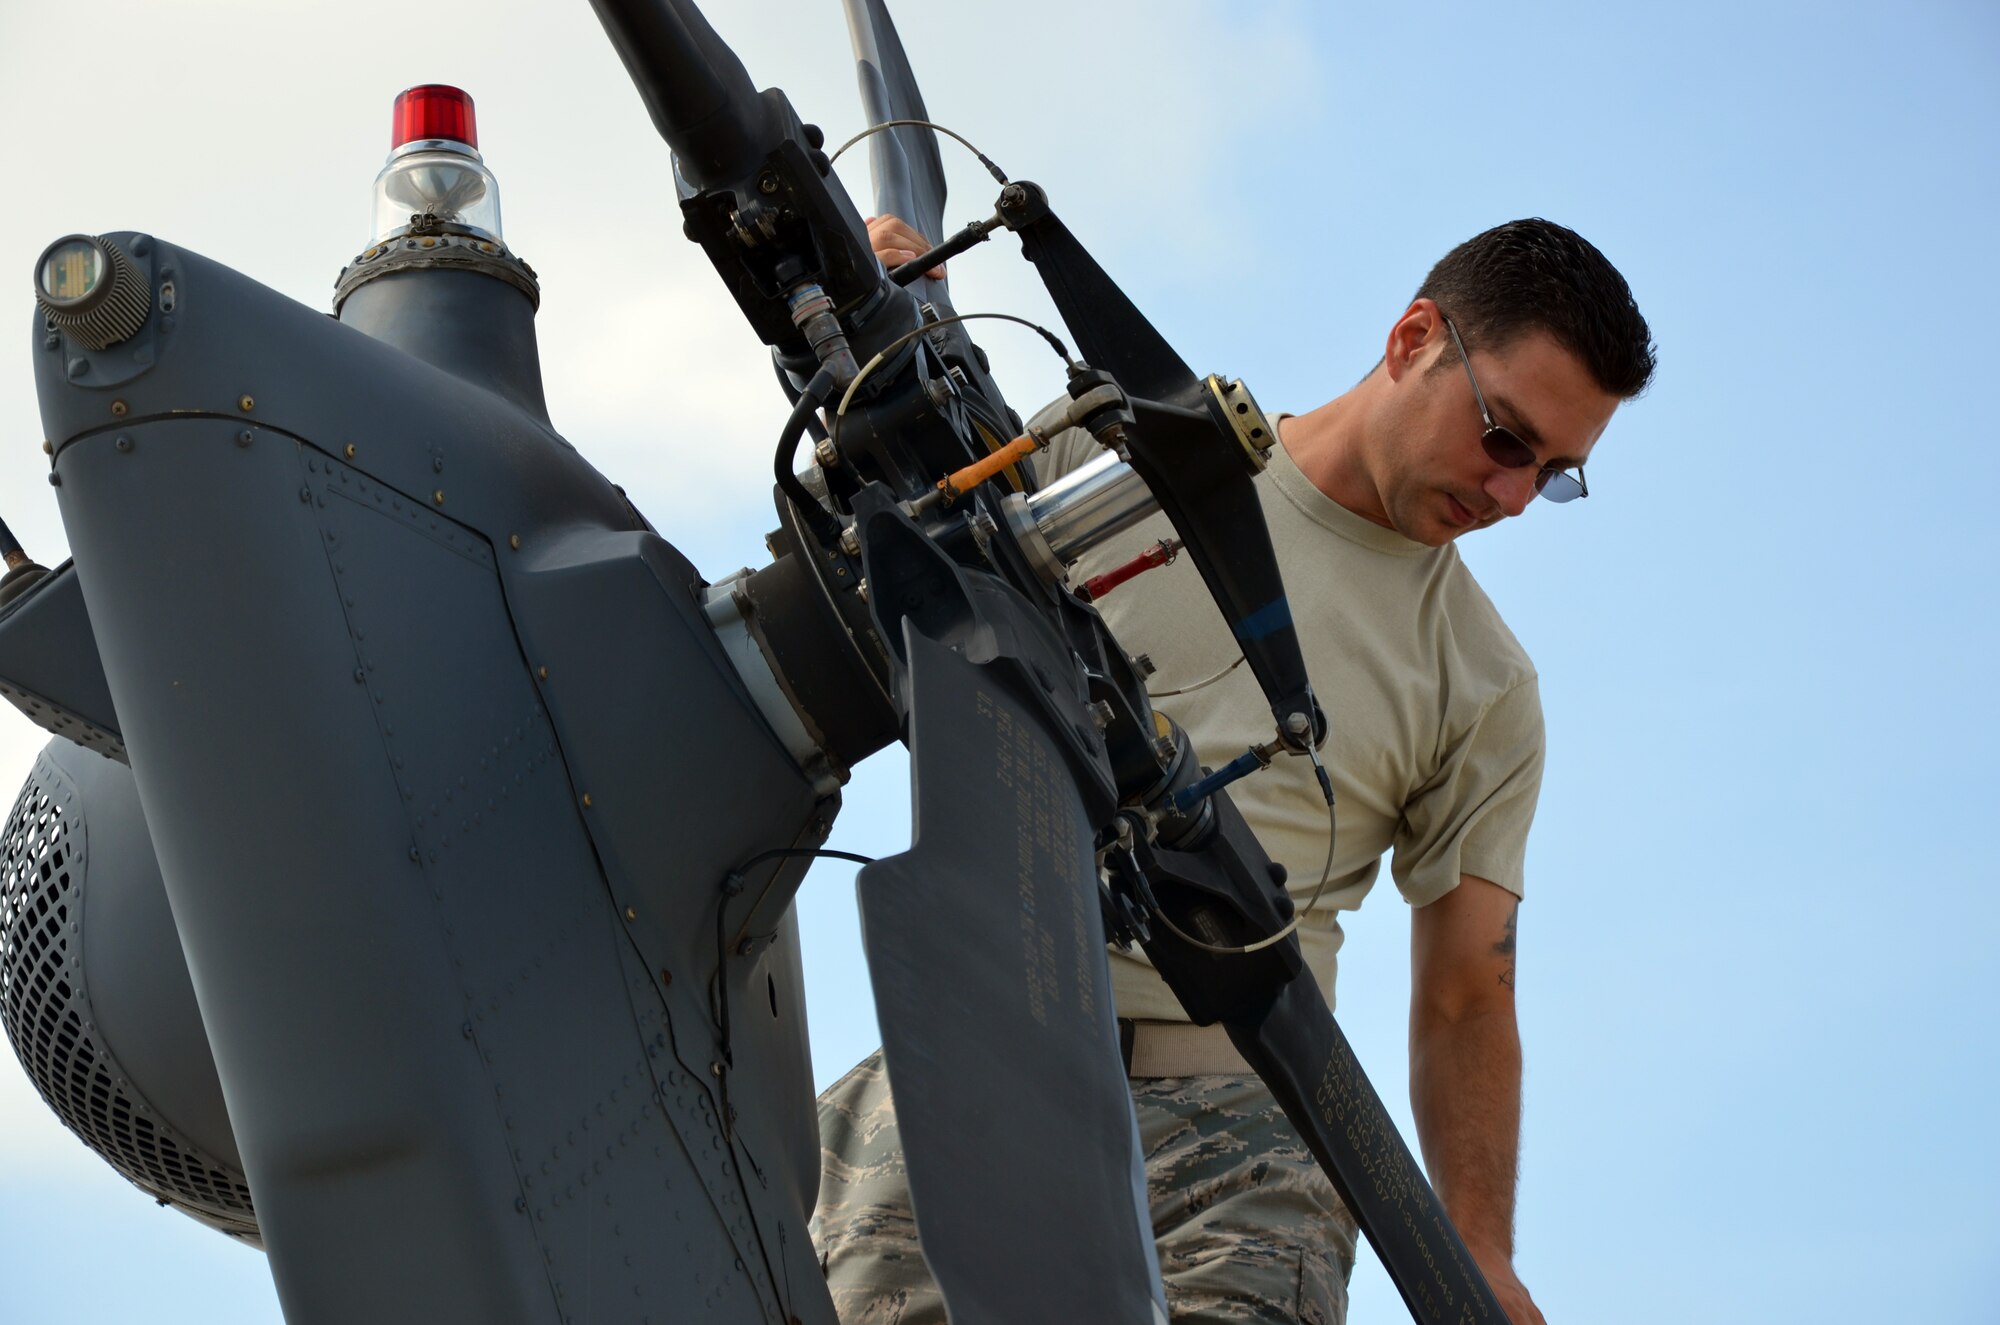 Tech. Sgt. Jeffery Cope, 920th Maintenance Group, checks the tail rotor on an HH-60G Pave hawk helicopter at Patrick Air Force Base, Fla., July 24, 2013. Cope and fellow maintenance Airmen in the group use an innovative tracking system for all training including pre-deployment. (U.S. Air Force photo/Tech. Sgt. Anna-Marie Wyant)